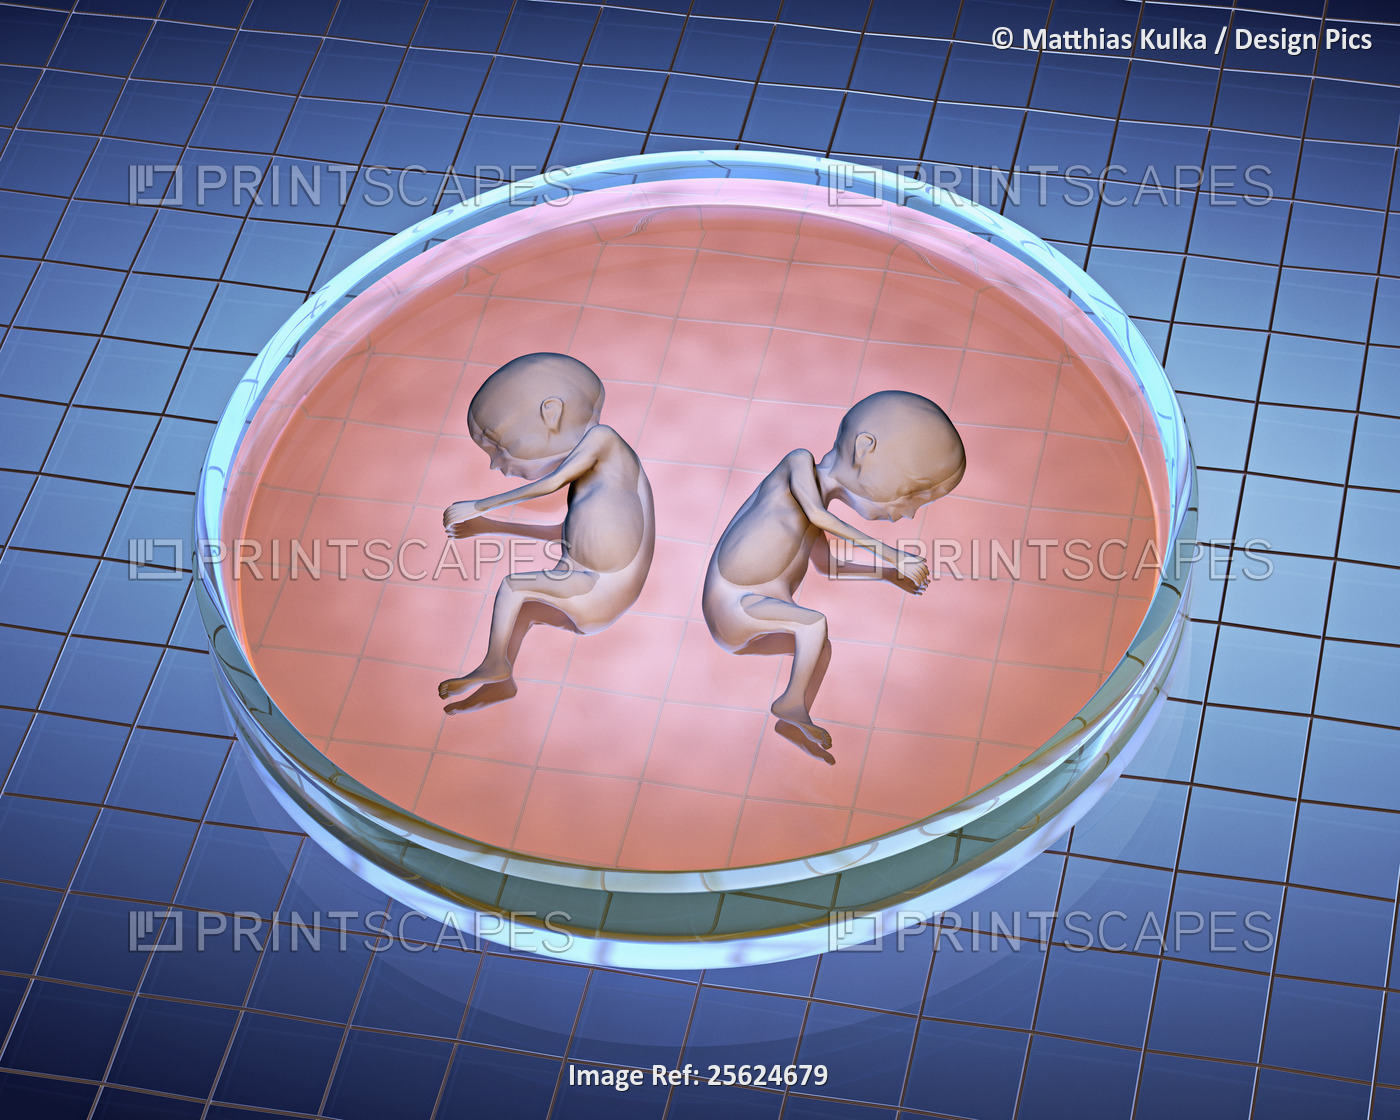 Illustration of Babies in Petrie Dish